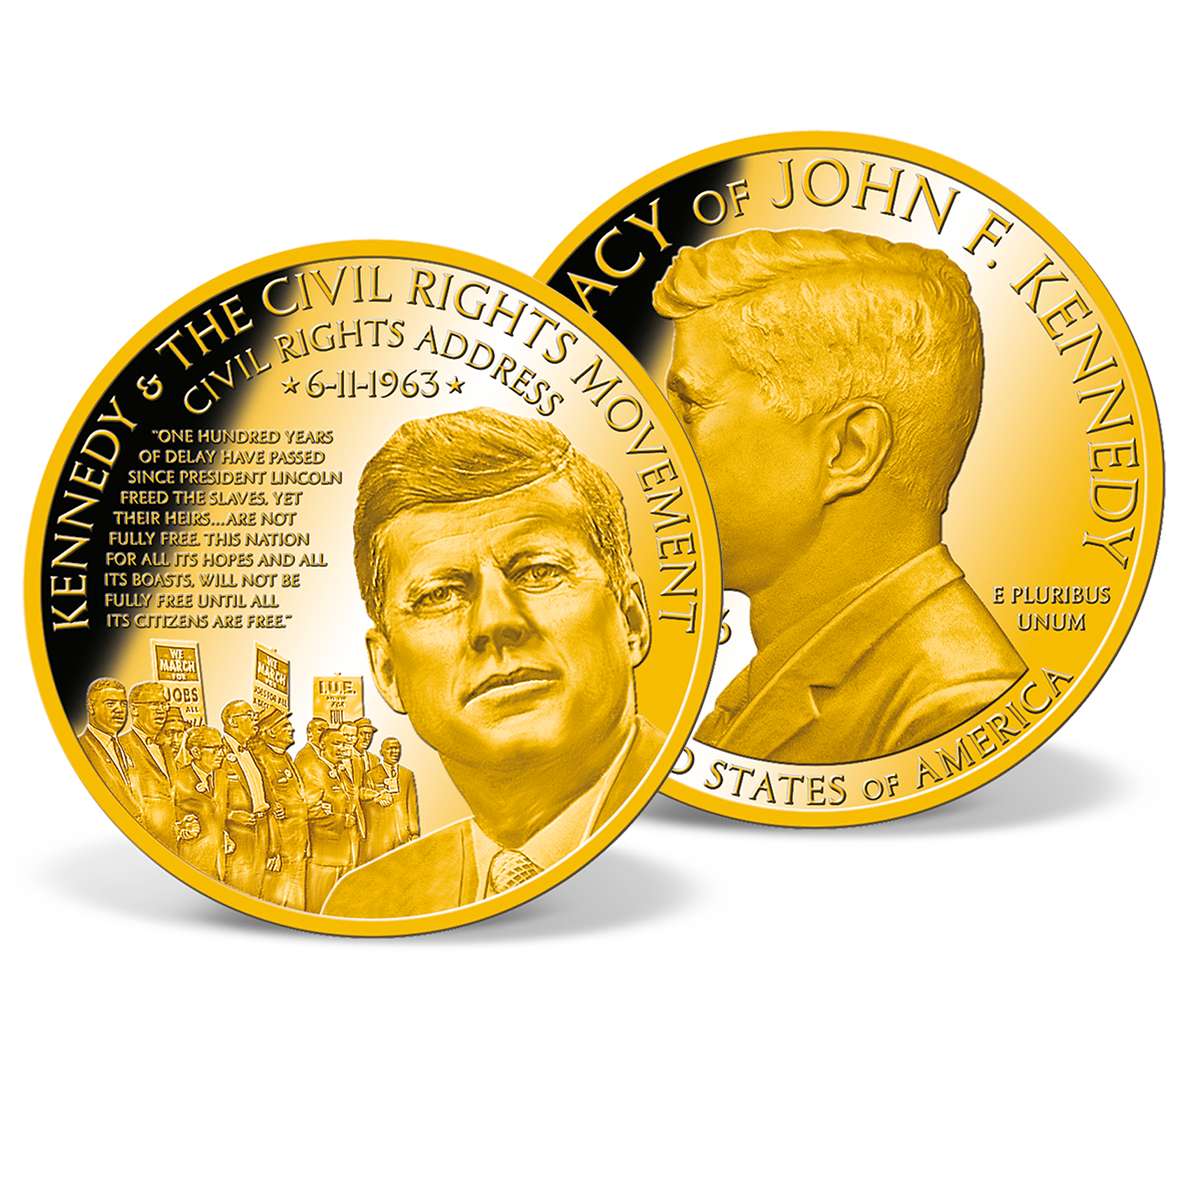 John F. Kennedy Commemorative Coins For Sale | American Mint